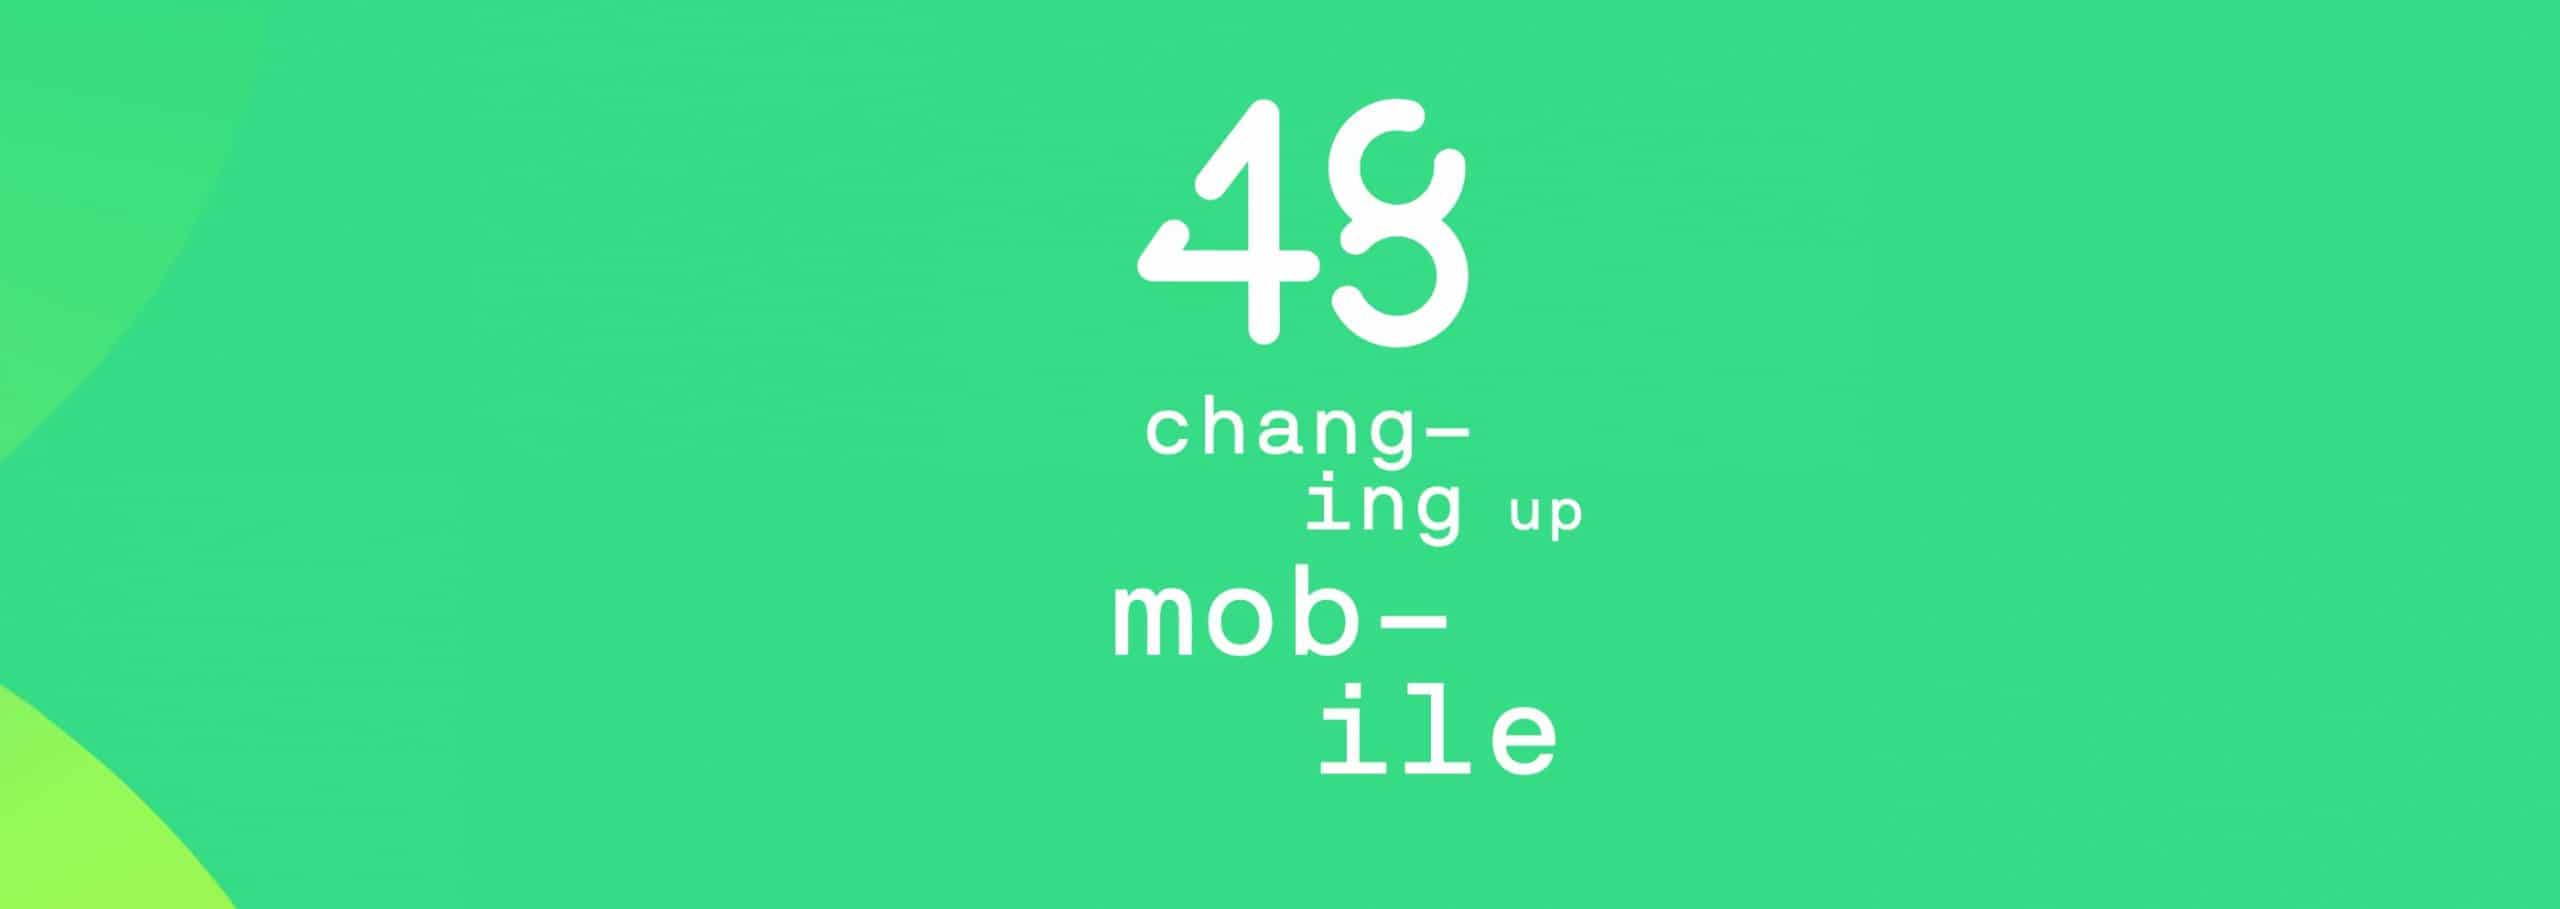 48 unveils Ireland’s Best Value mobile plan for new customers